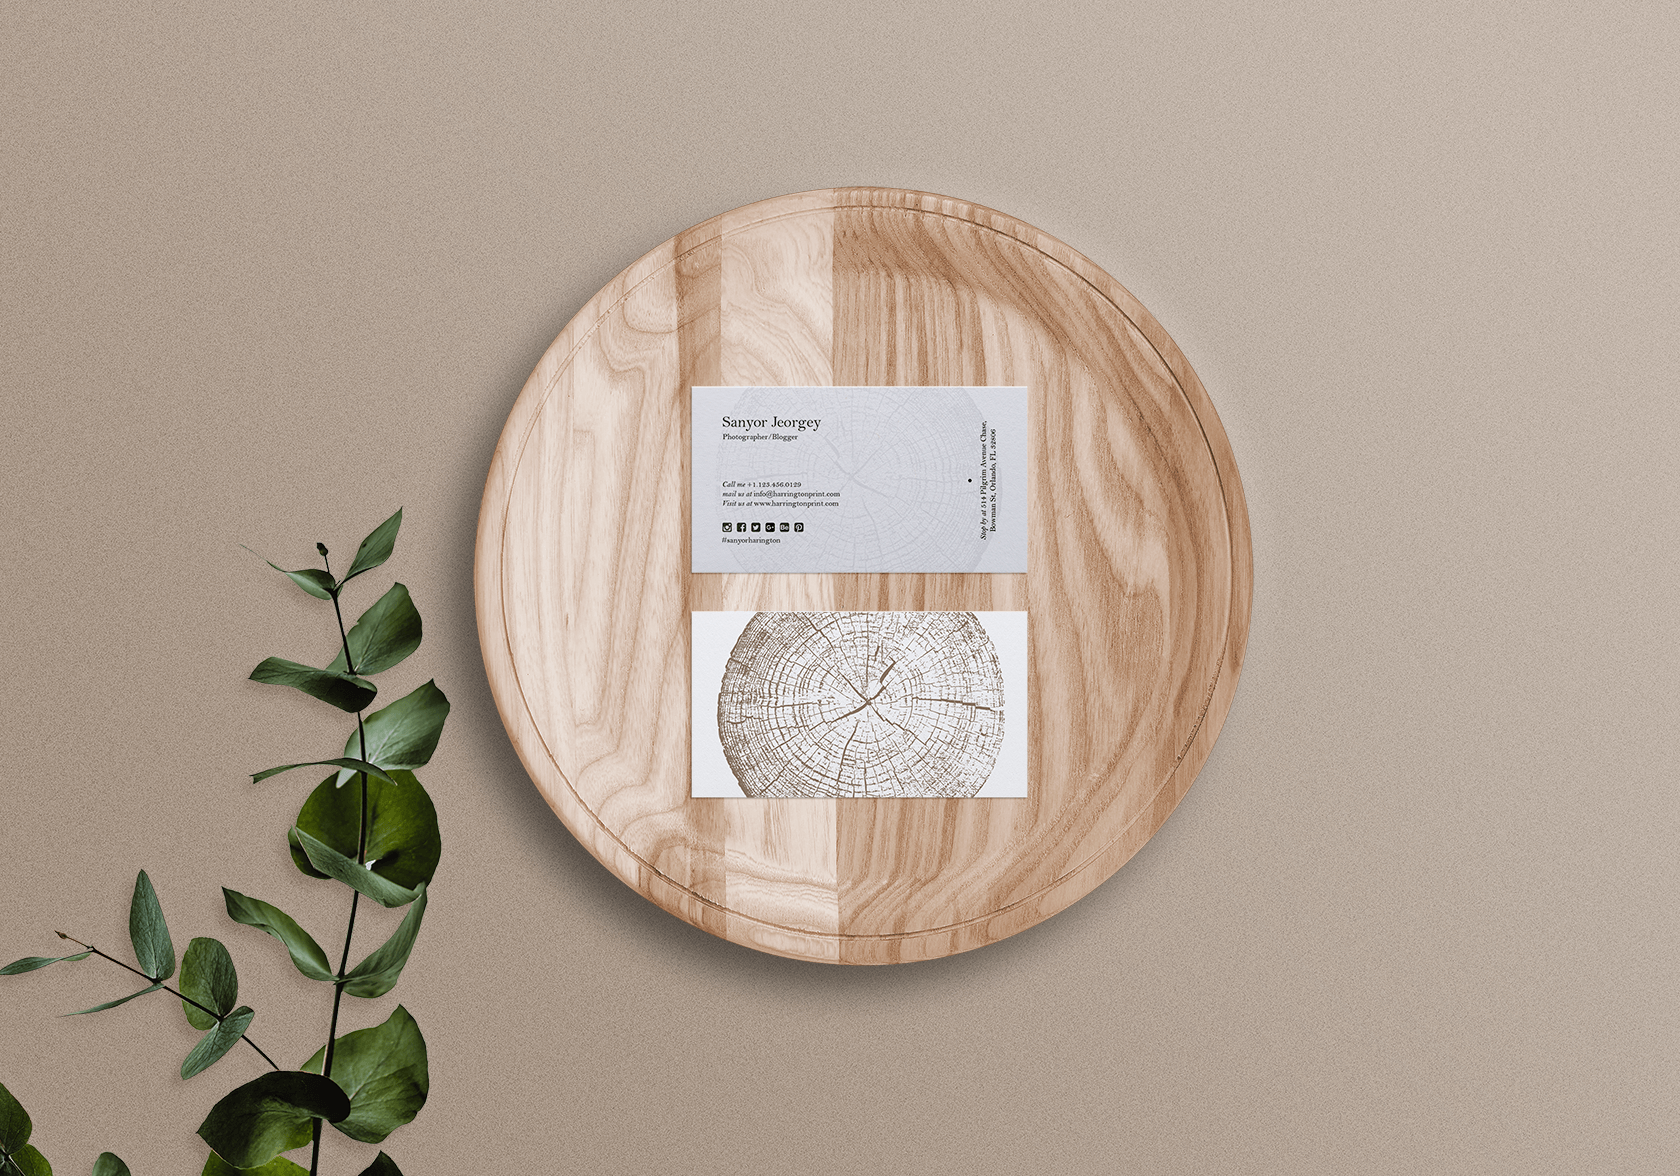 Free Business Card Mockup On Wooden Tray